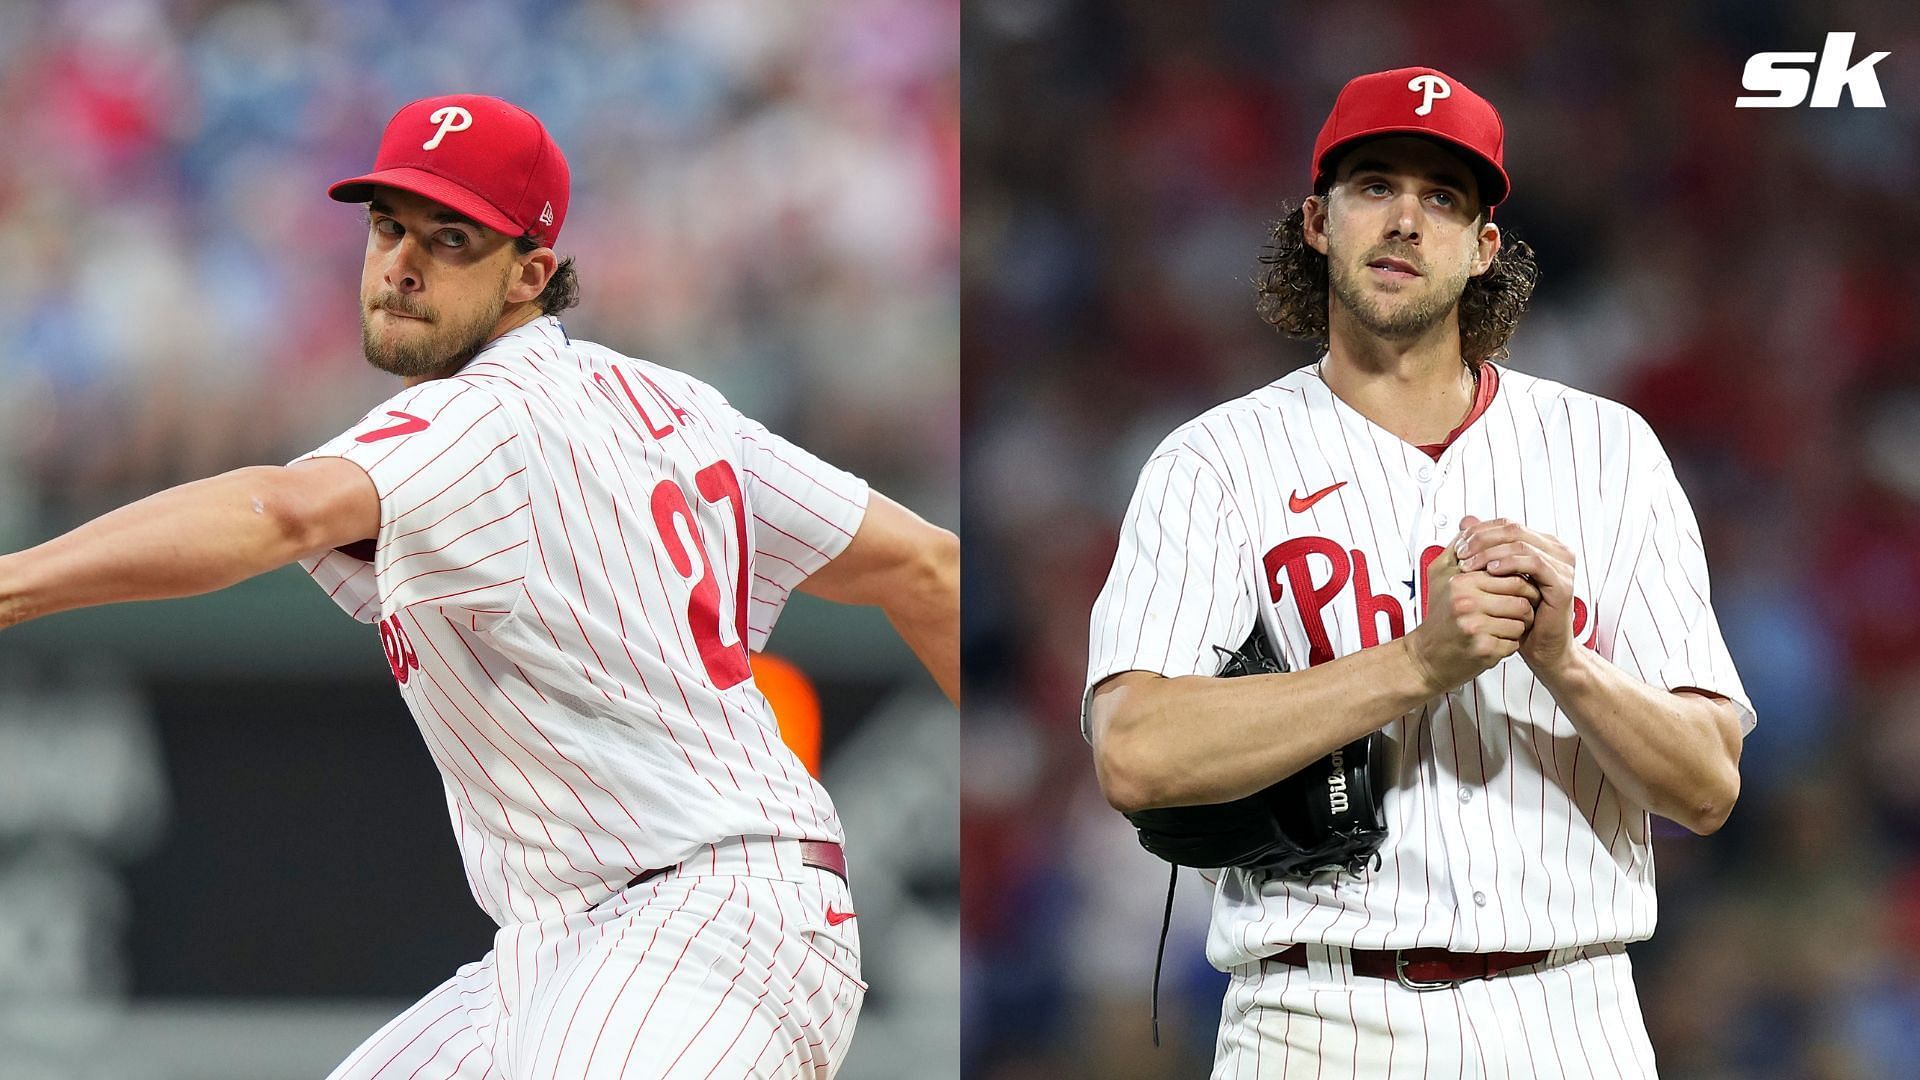 Aaron Nola will get the ball in Game 6 for the Phillies